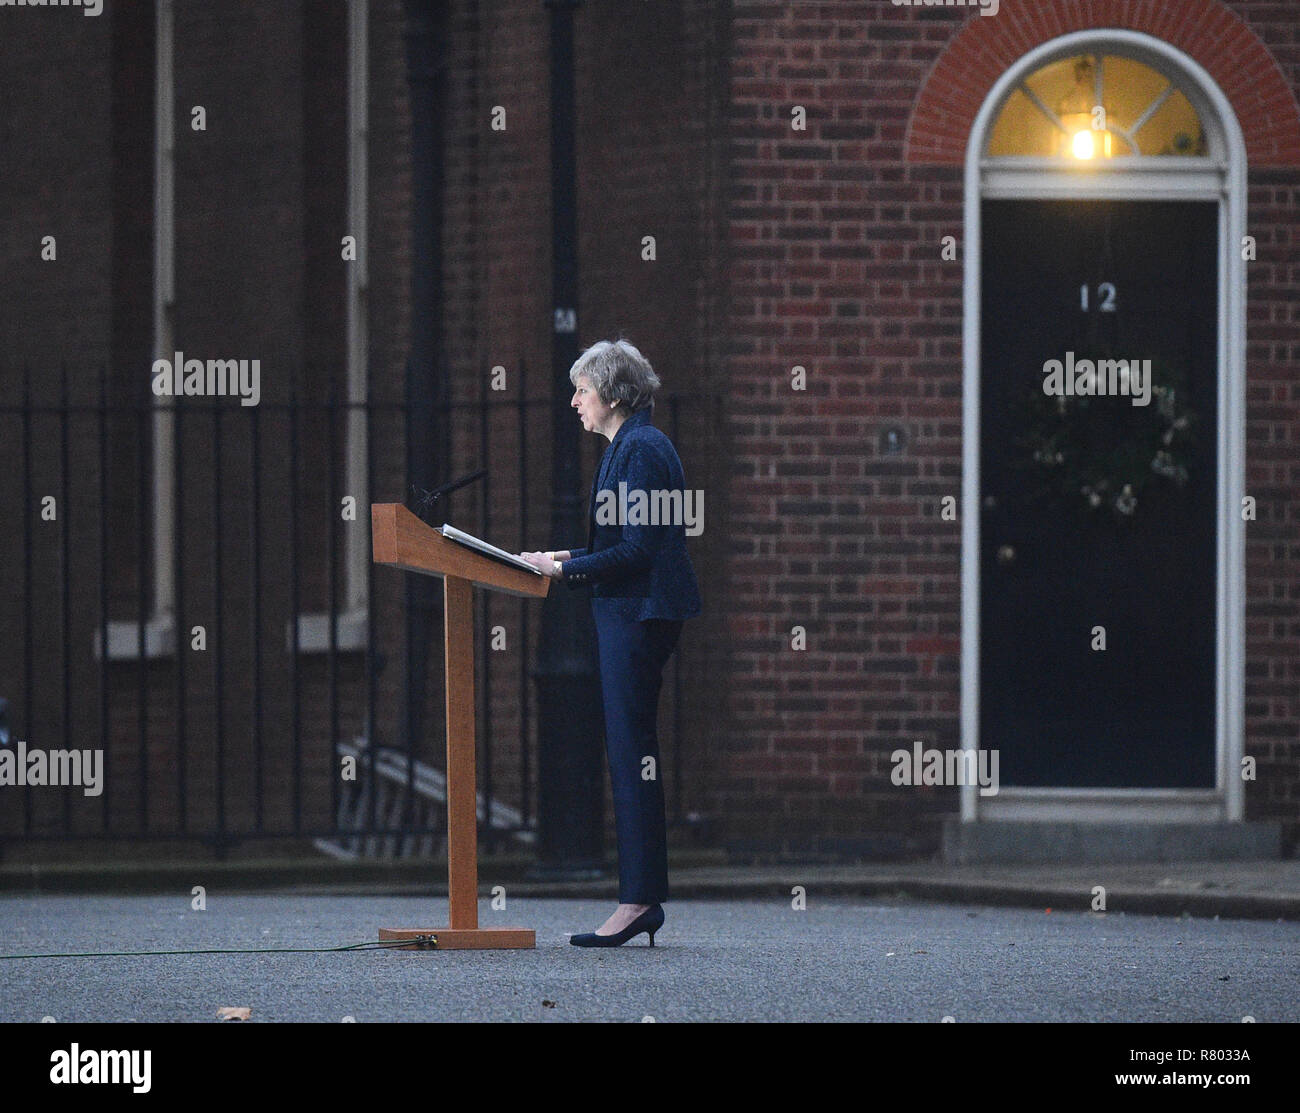 Prime Minister Theresa May making a statement outside 10 Downing Street, London, after the 1922 Committee announced that enough Conservative MPs have requested a vote of confidence in Mrs May to trigger a leadership contest. Stock Photo